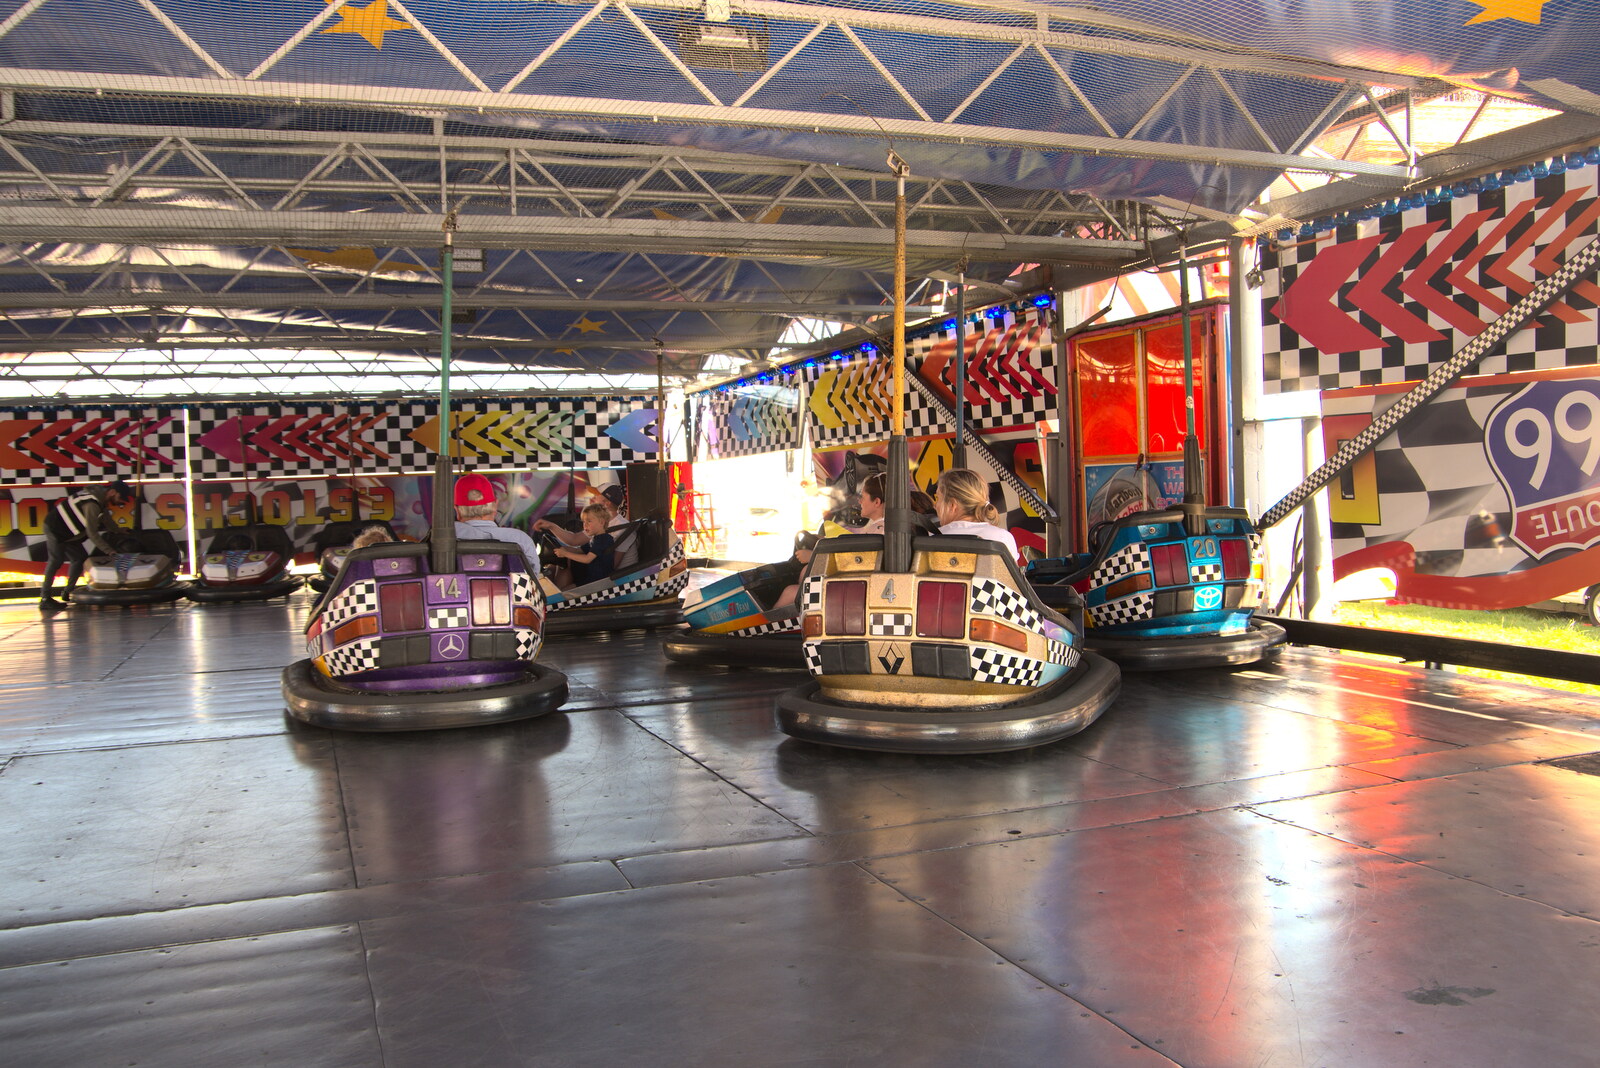 We have a go on the dodgems from A Day at the Beach with Sis, Southwold, Suffolk - 31st May 2021